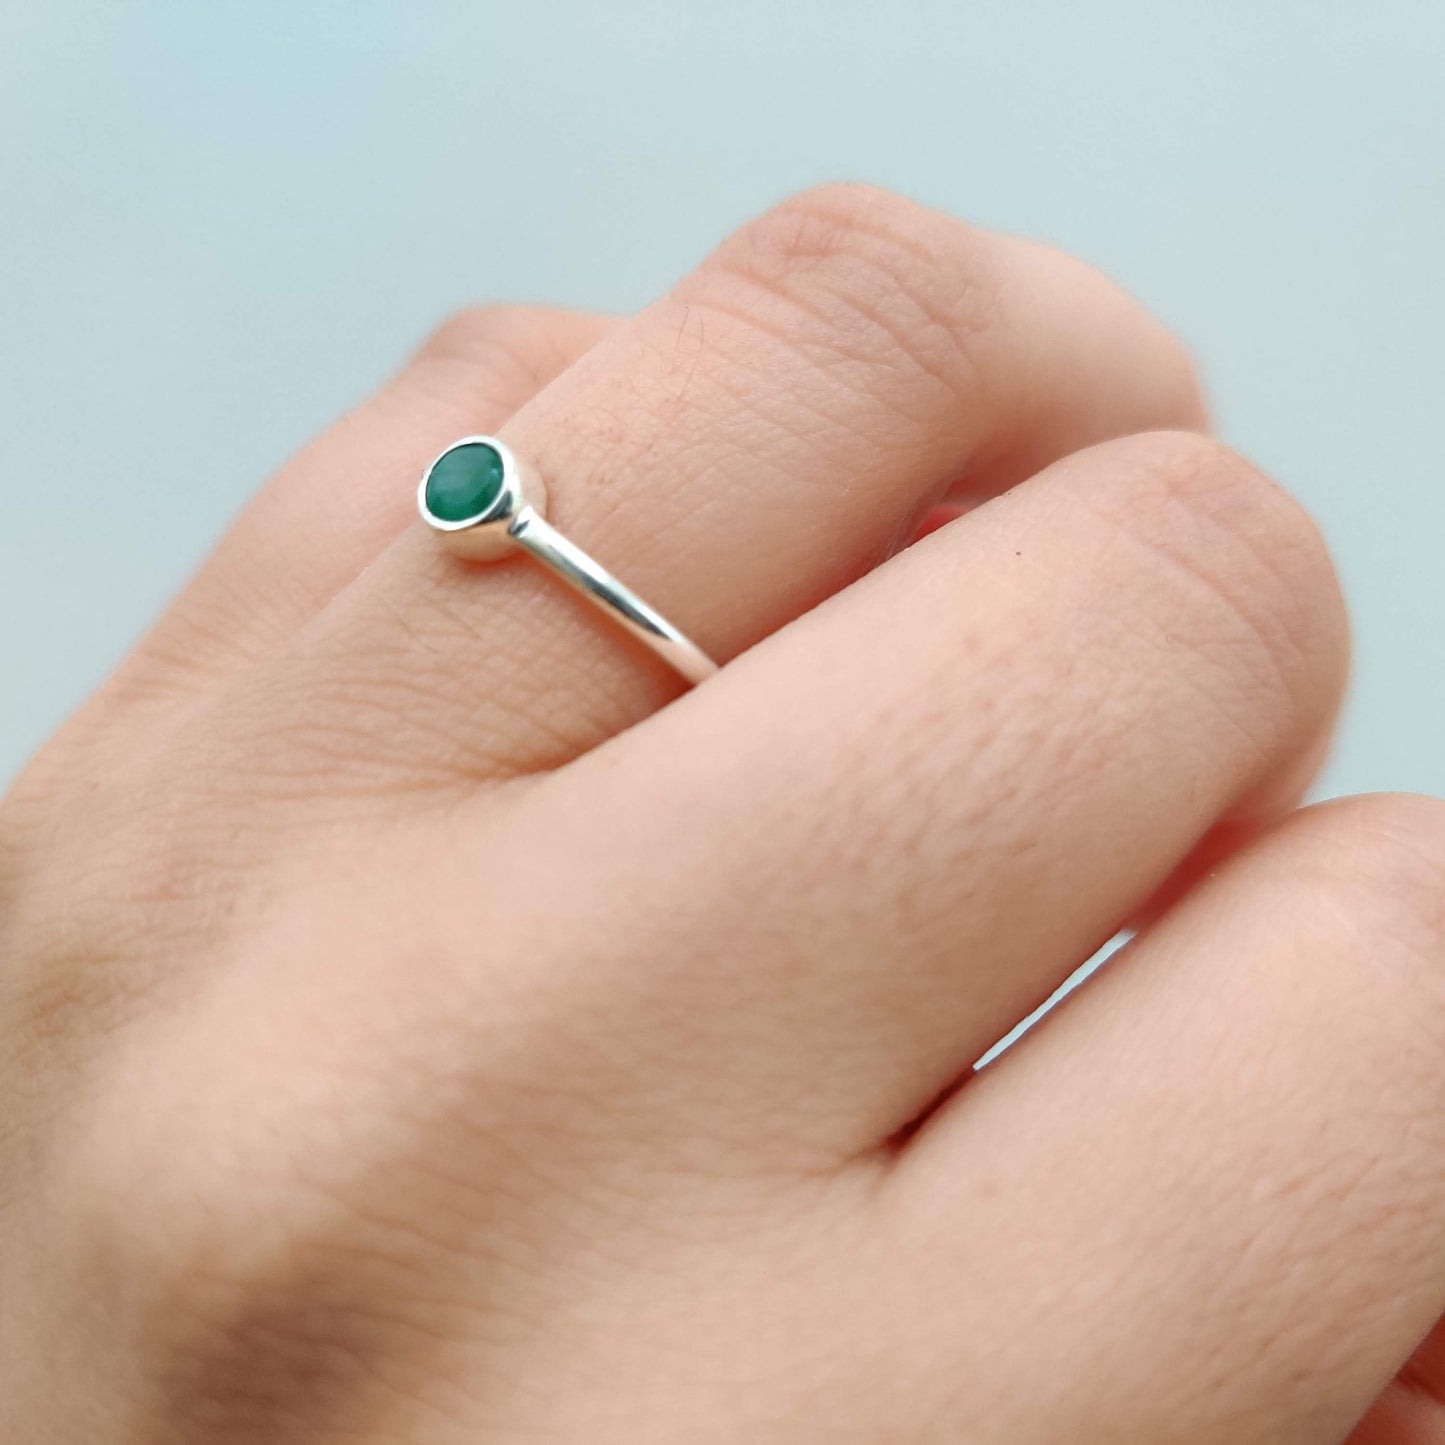 Emerald Delicate 925 Sterling Silver Ring - Rivendell Shop